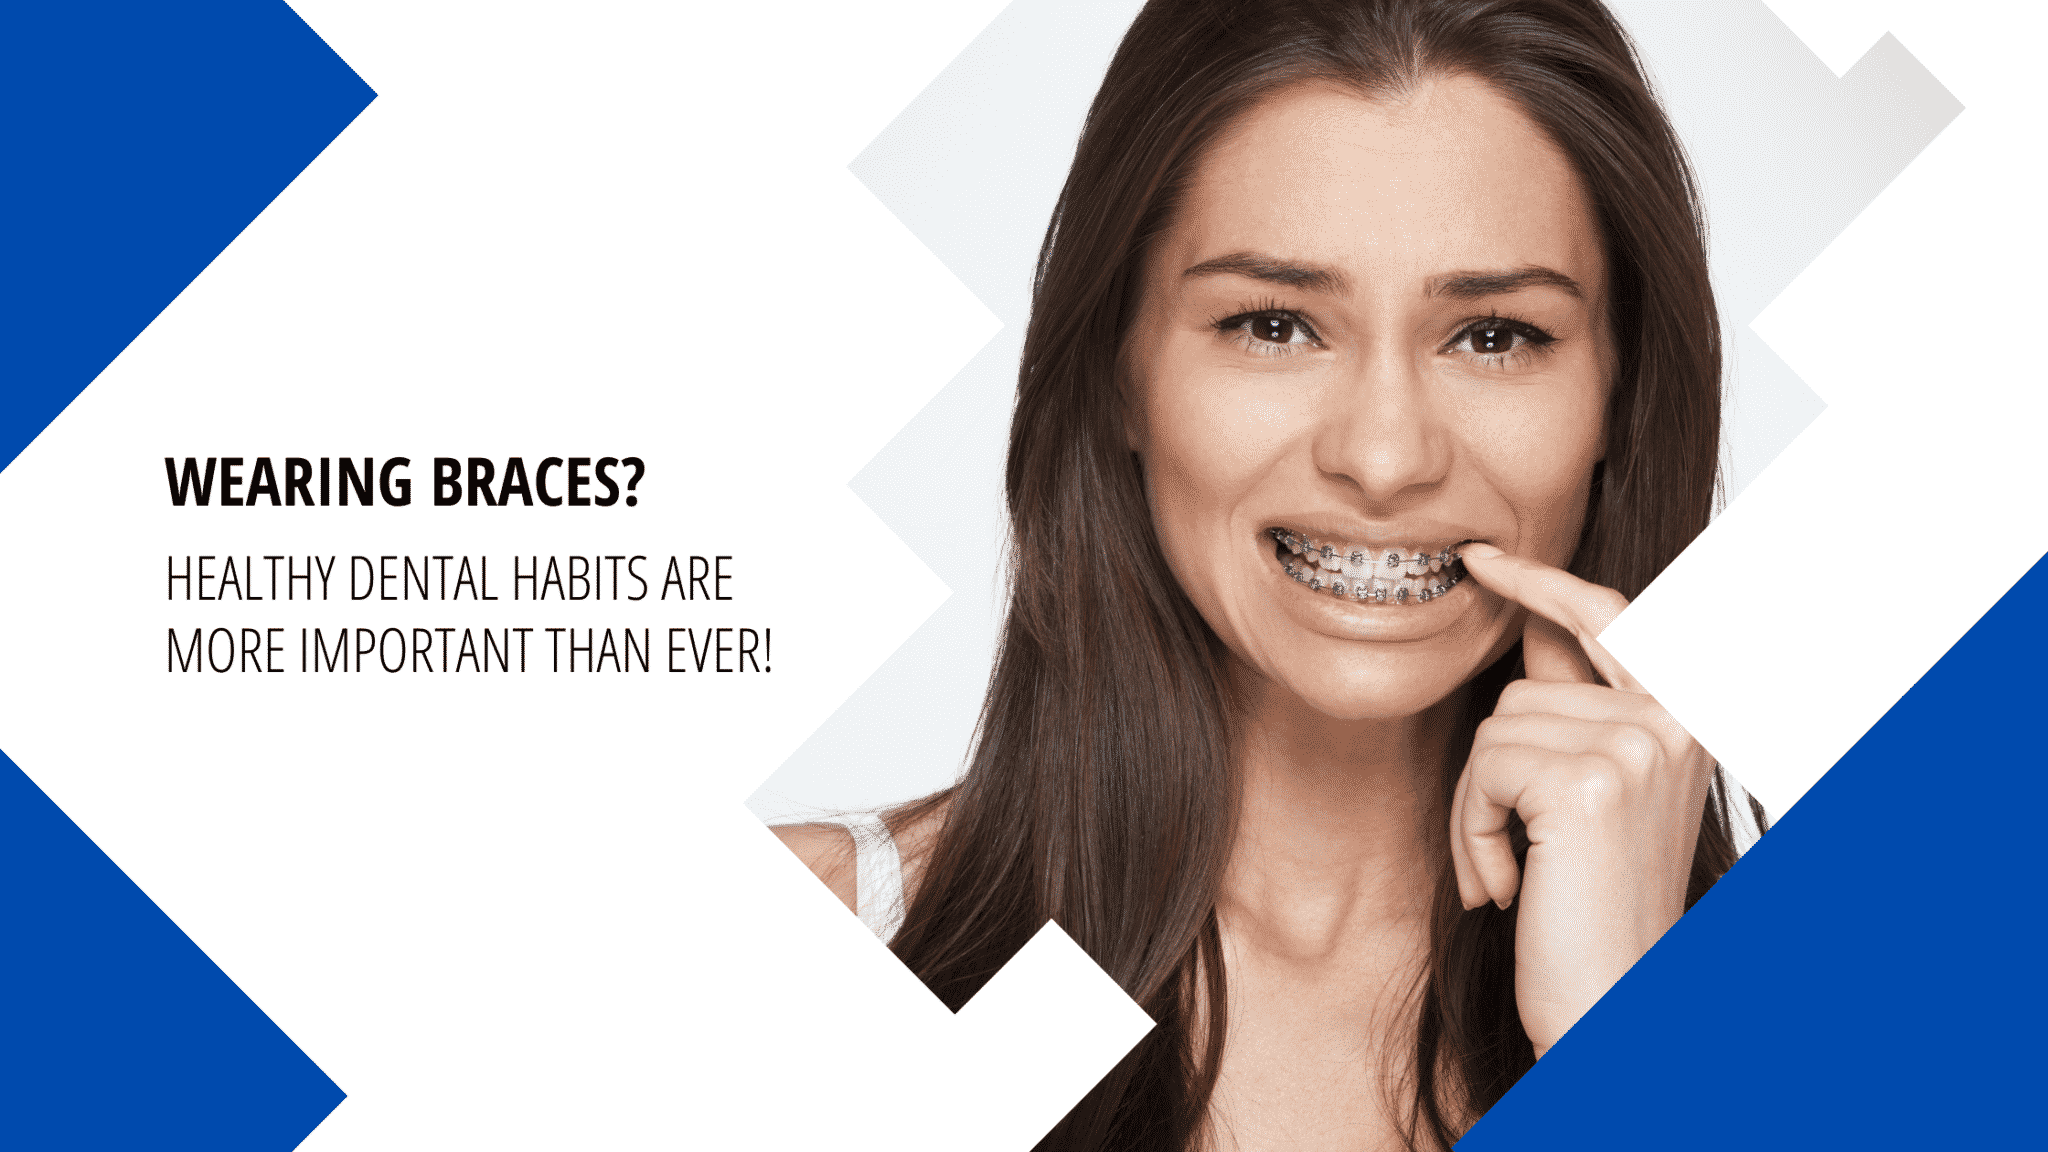 Healthy Dental Habits with Braces